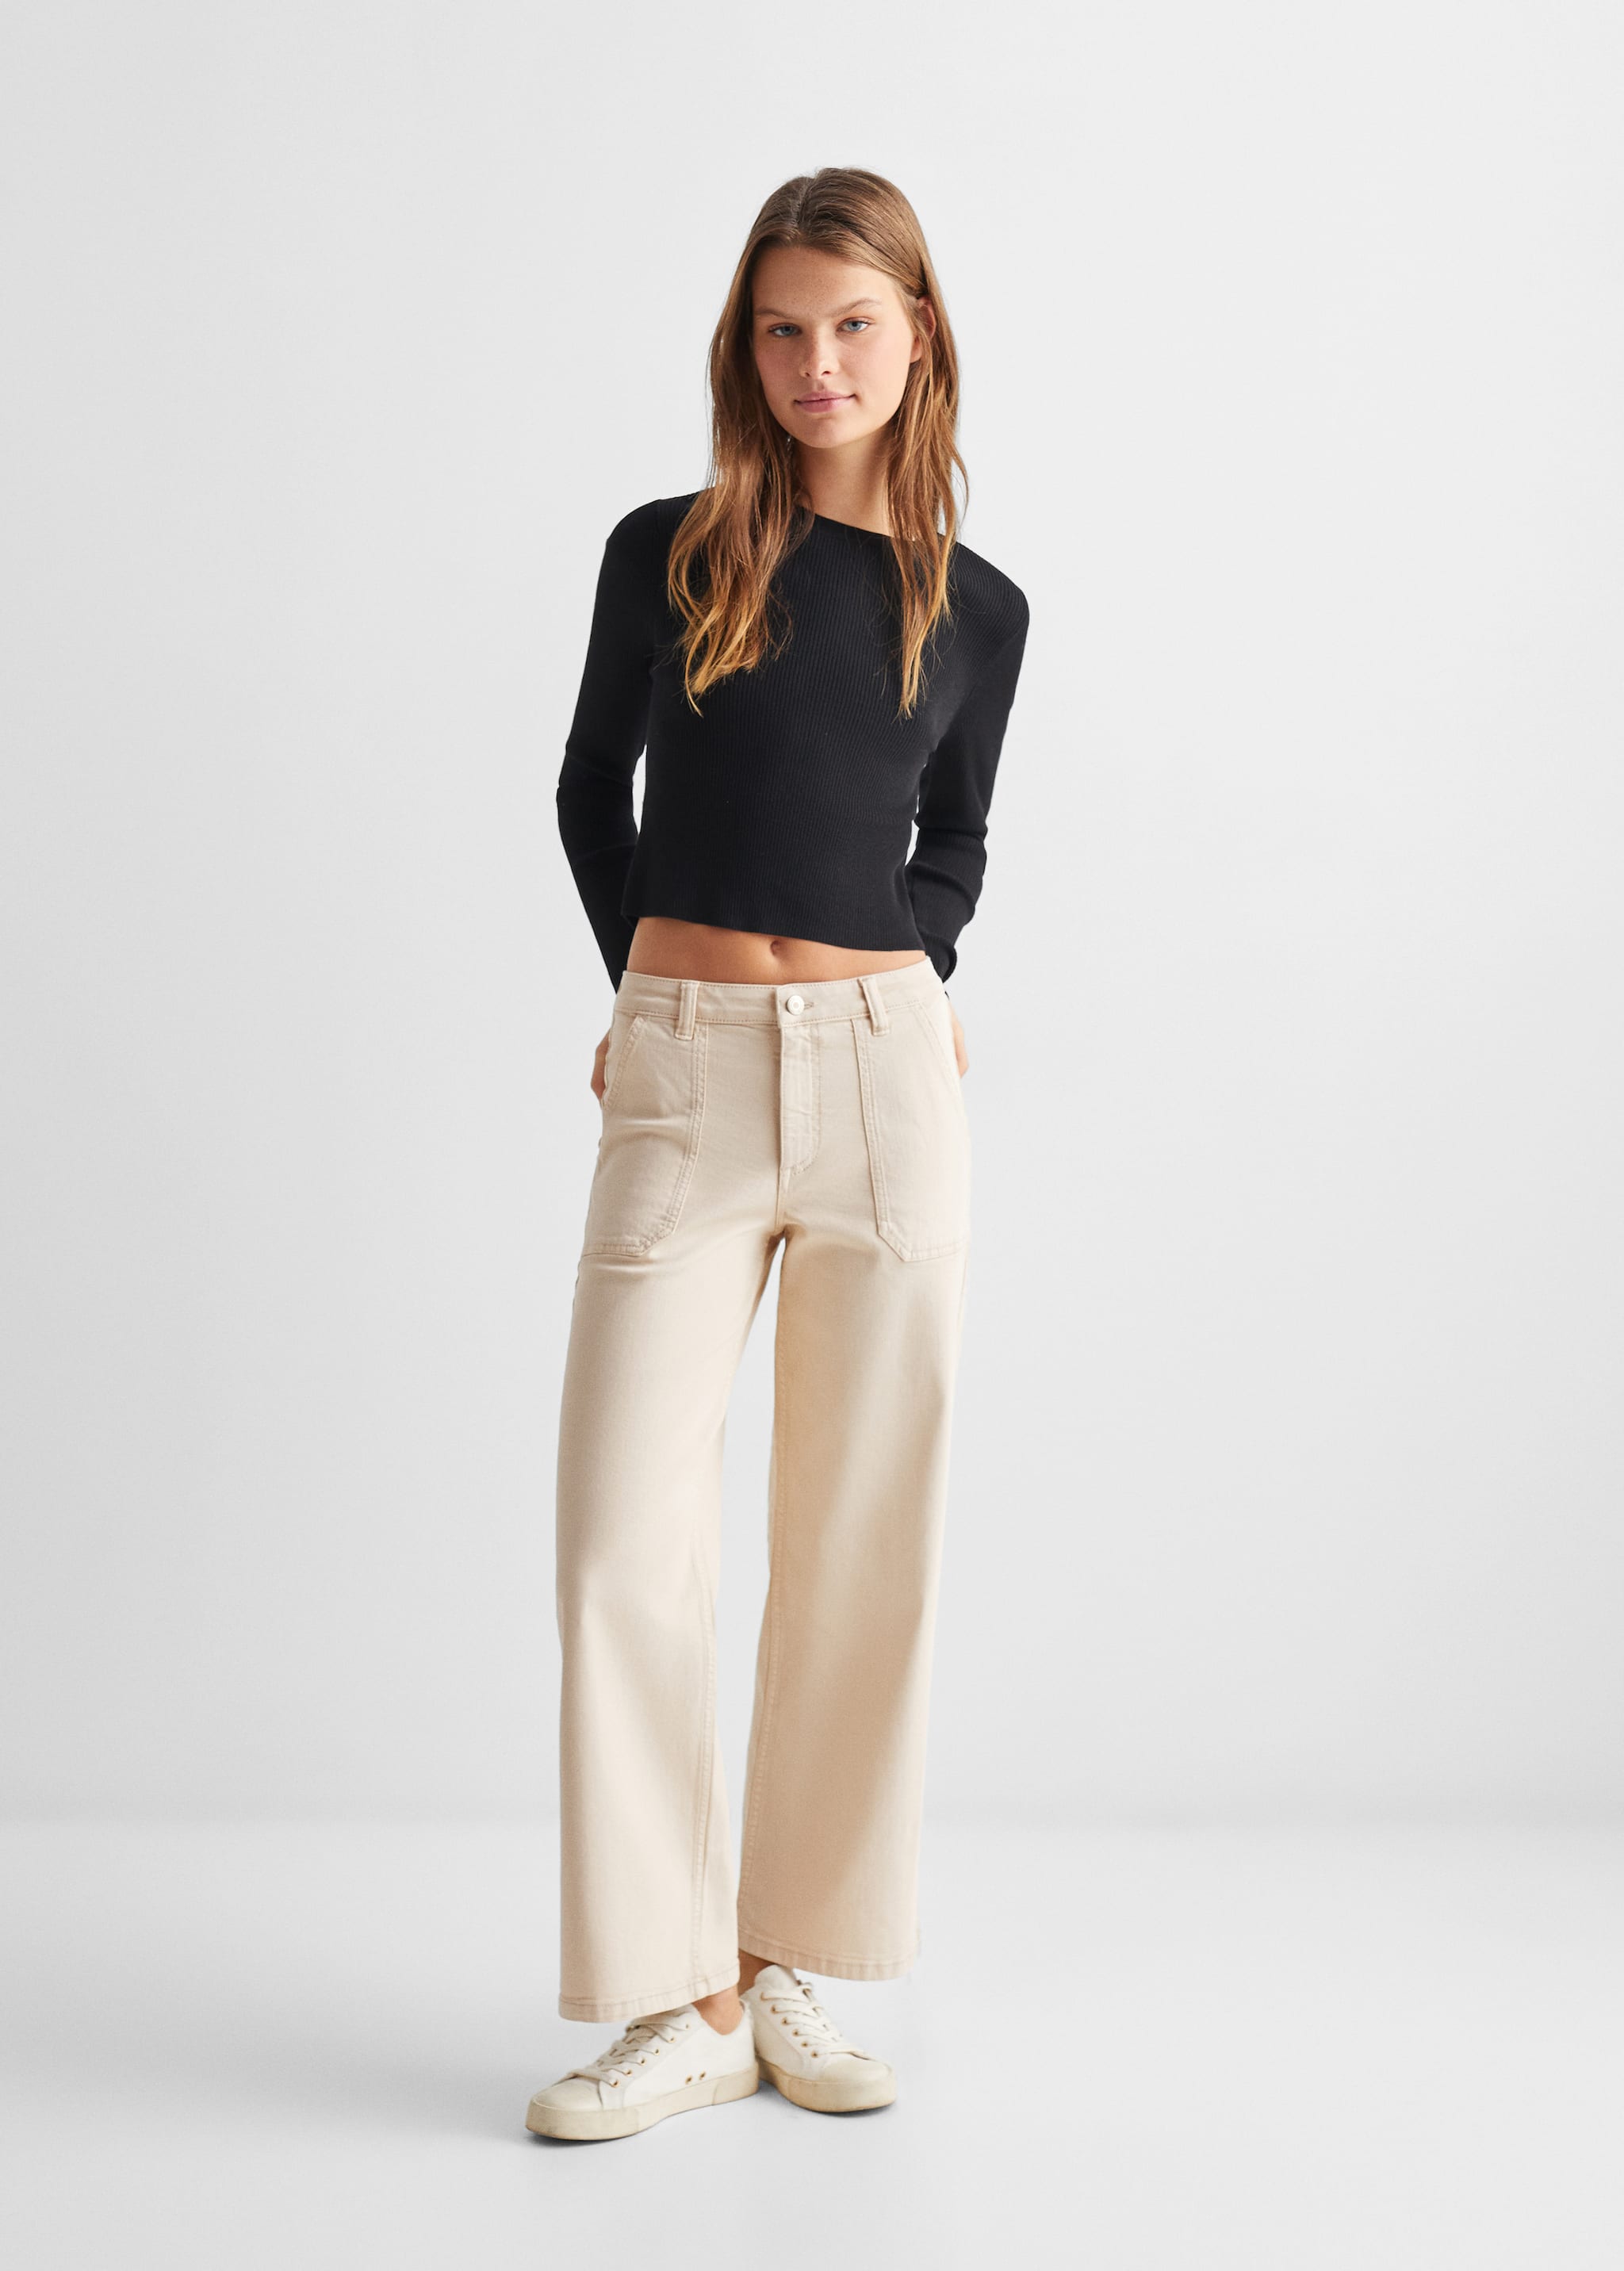 Culotte trousers with pockets - General plane